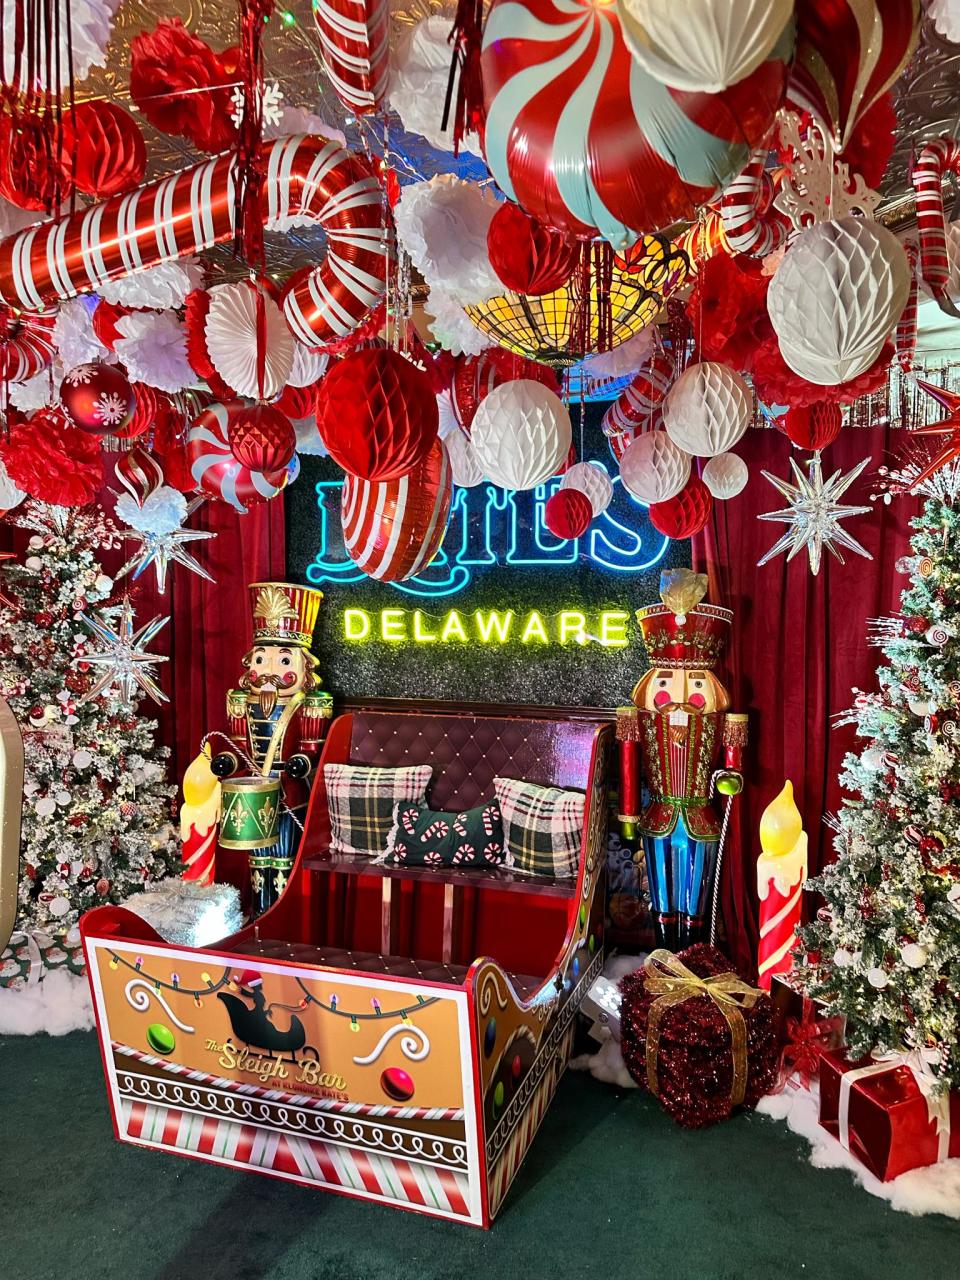 A cozy sled is a popular spot for photos at the pop-up Sleigh Bar at Klondike Kate's Restaurant & Saloon in Newark.